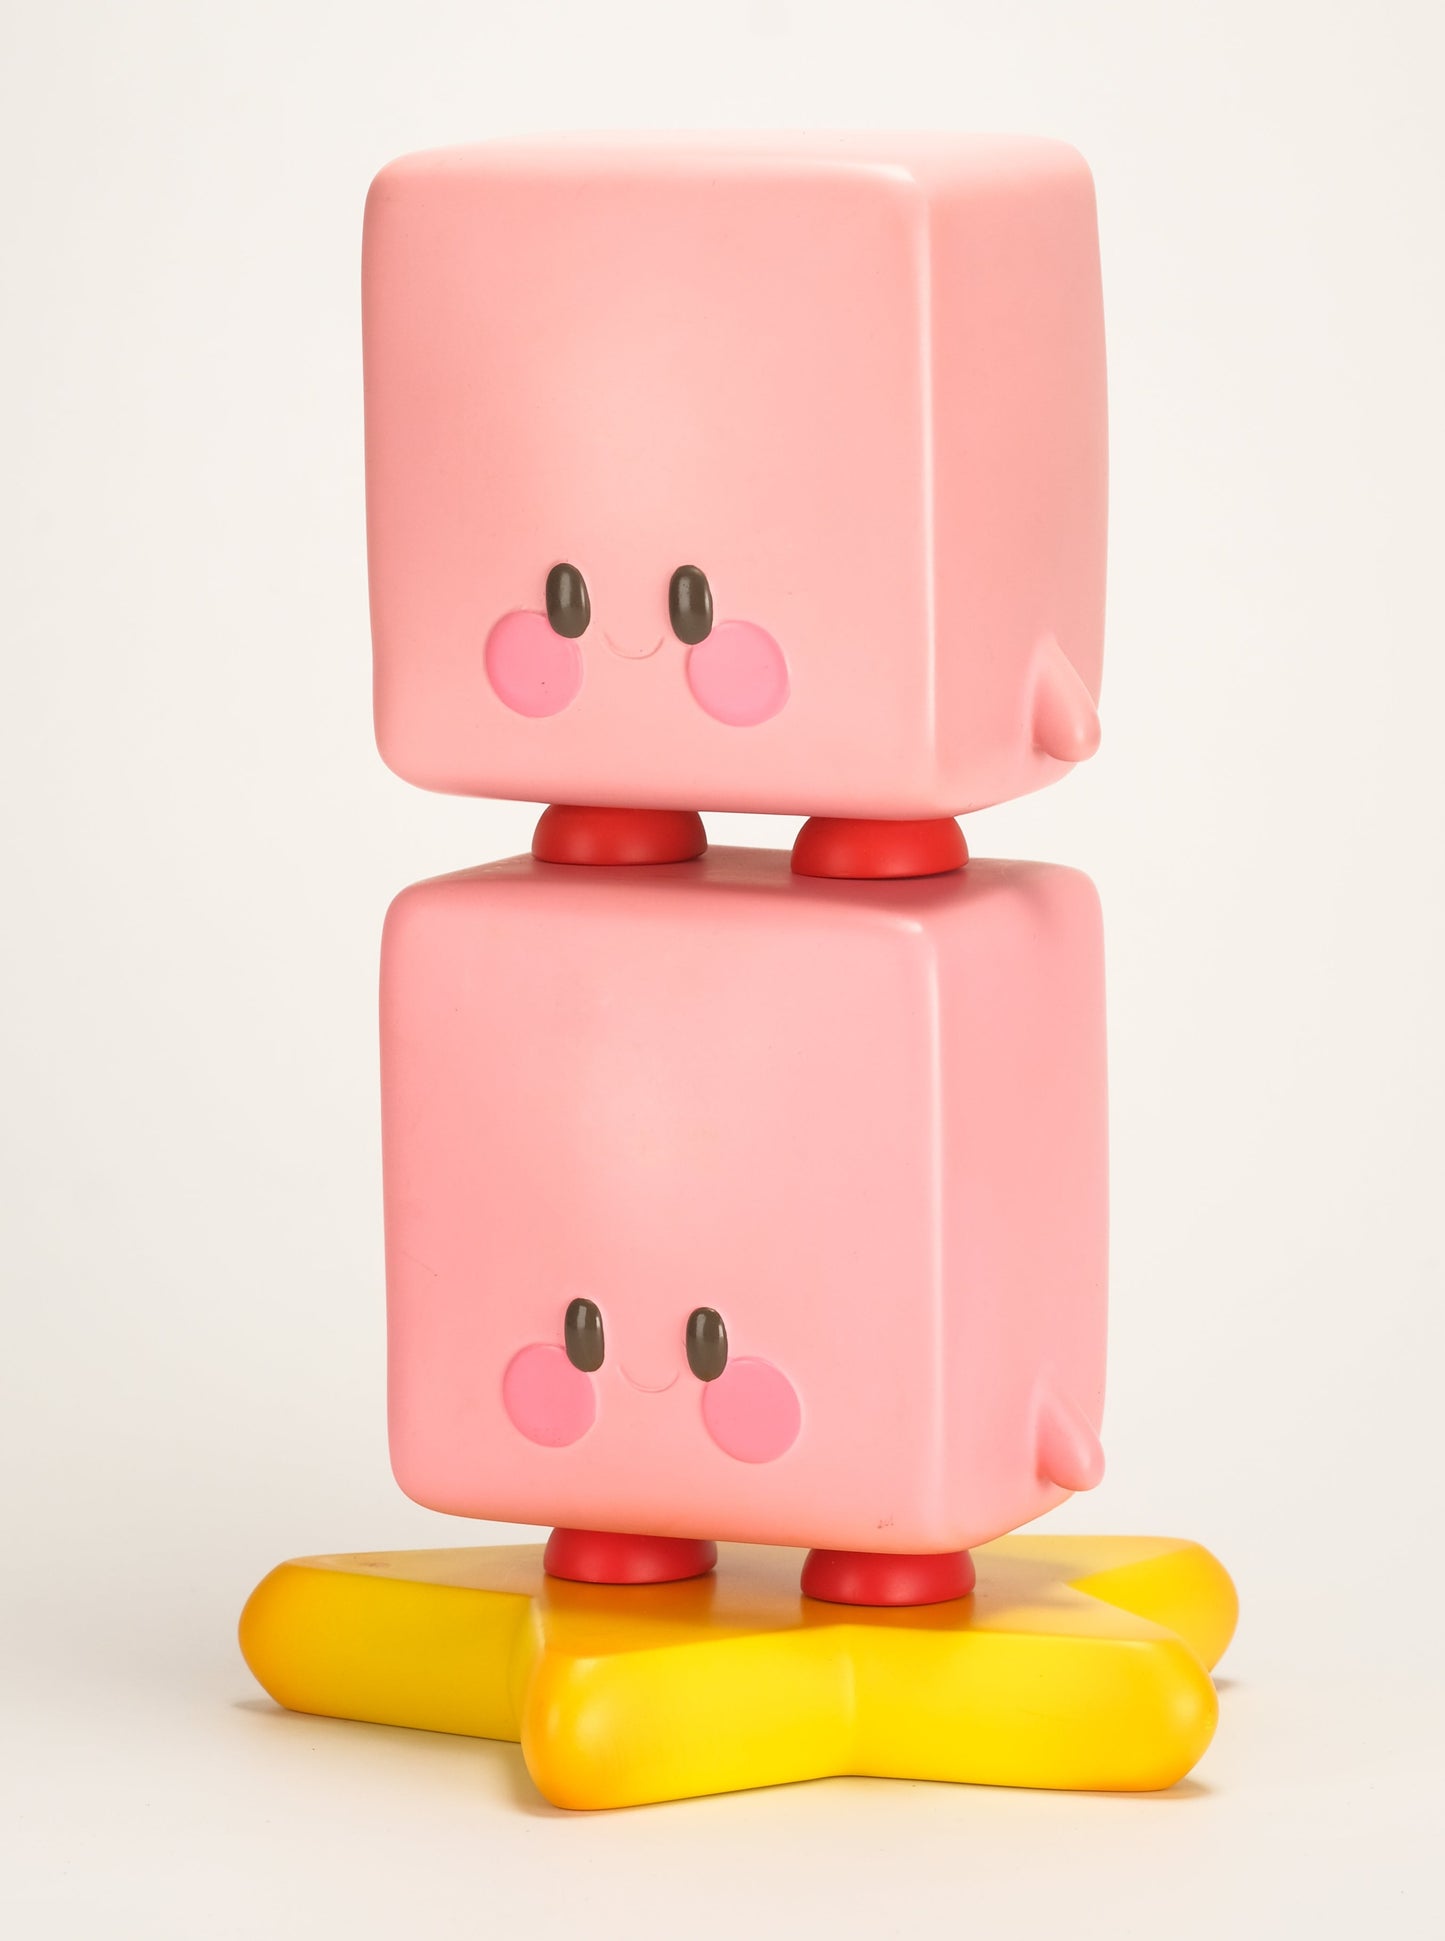 Cuby Resin Toy [Group Buy]